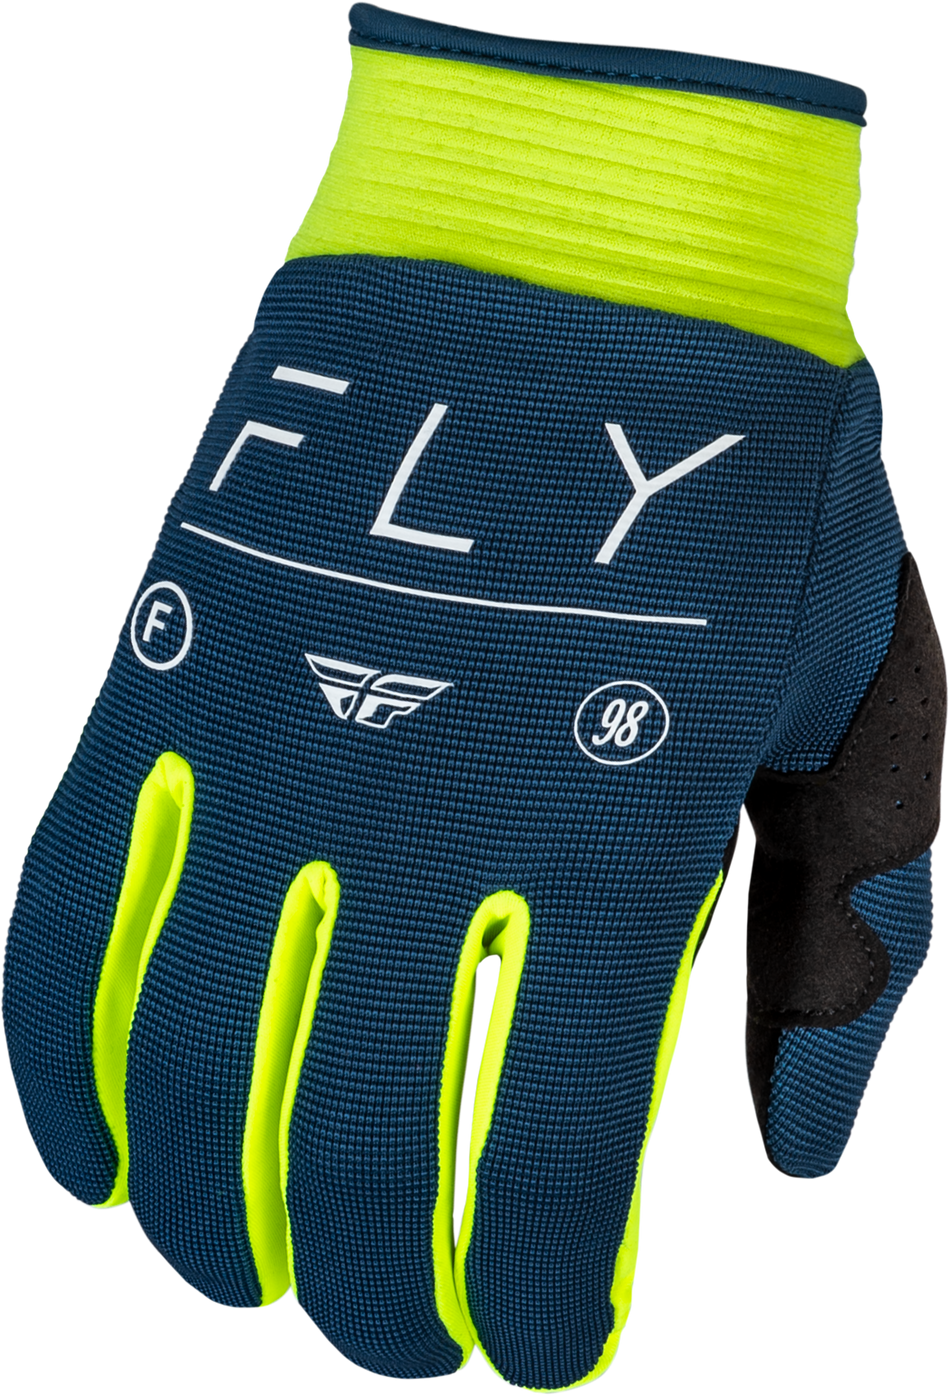 FLY RACING Youth F-16 Gloves Navy/Hi-Vis/White Yl 377-912YL